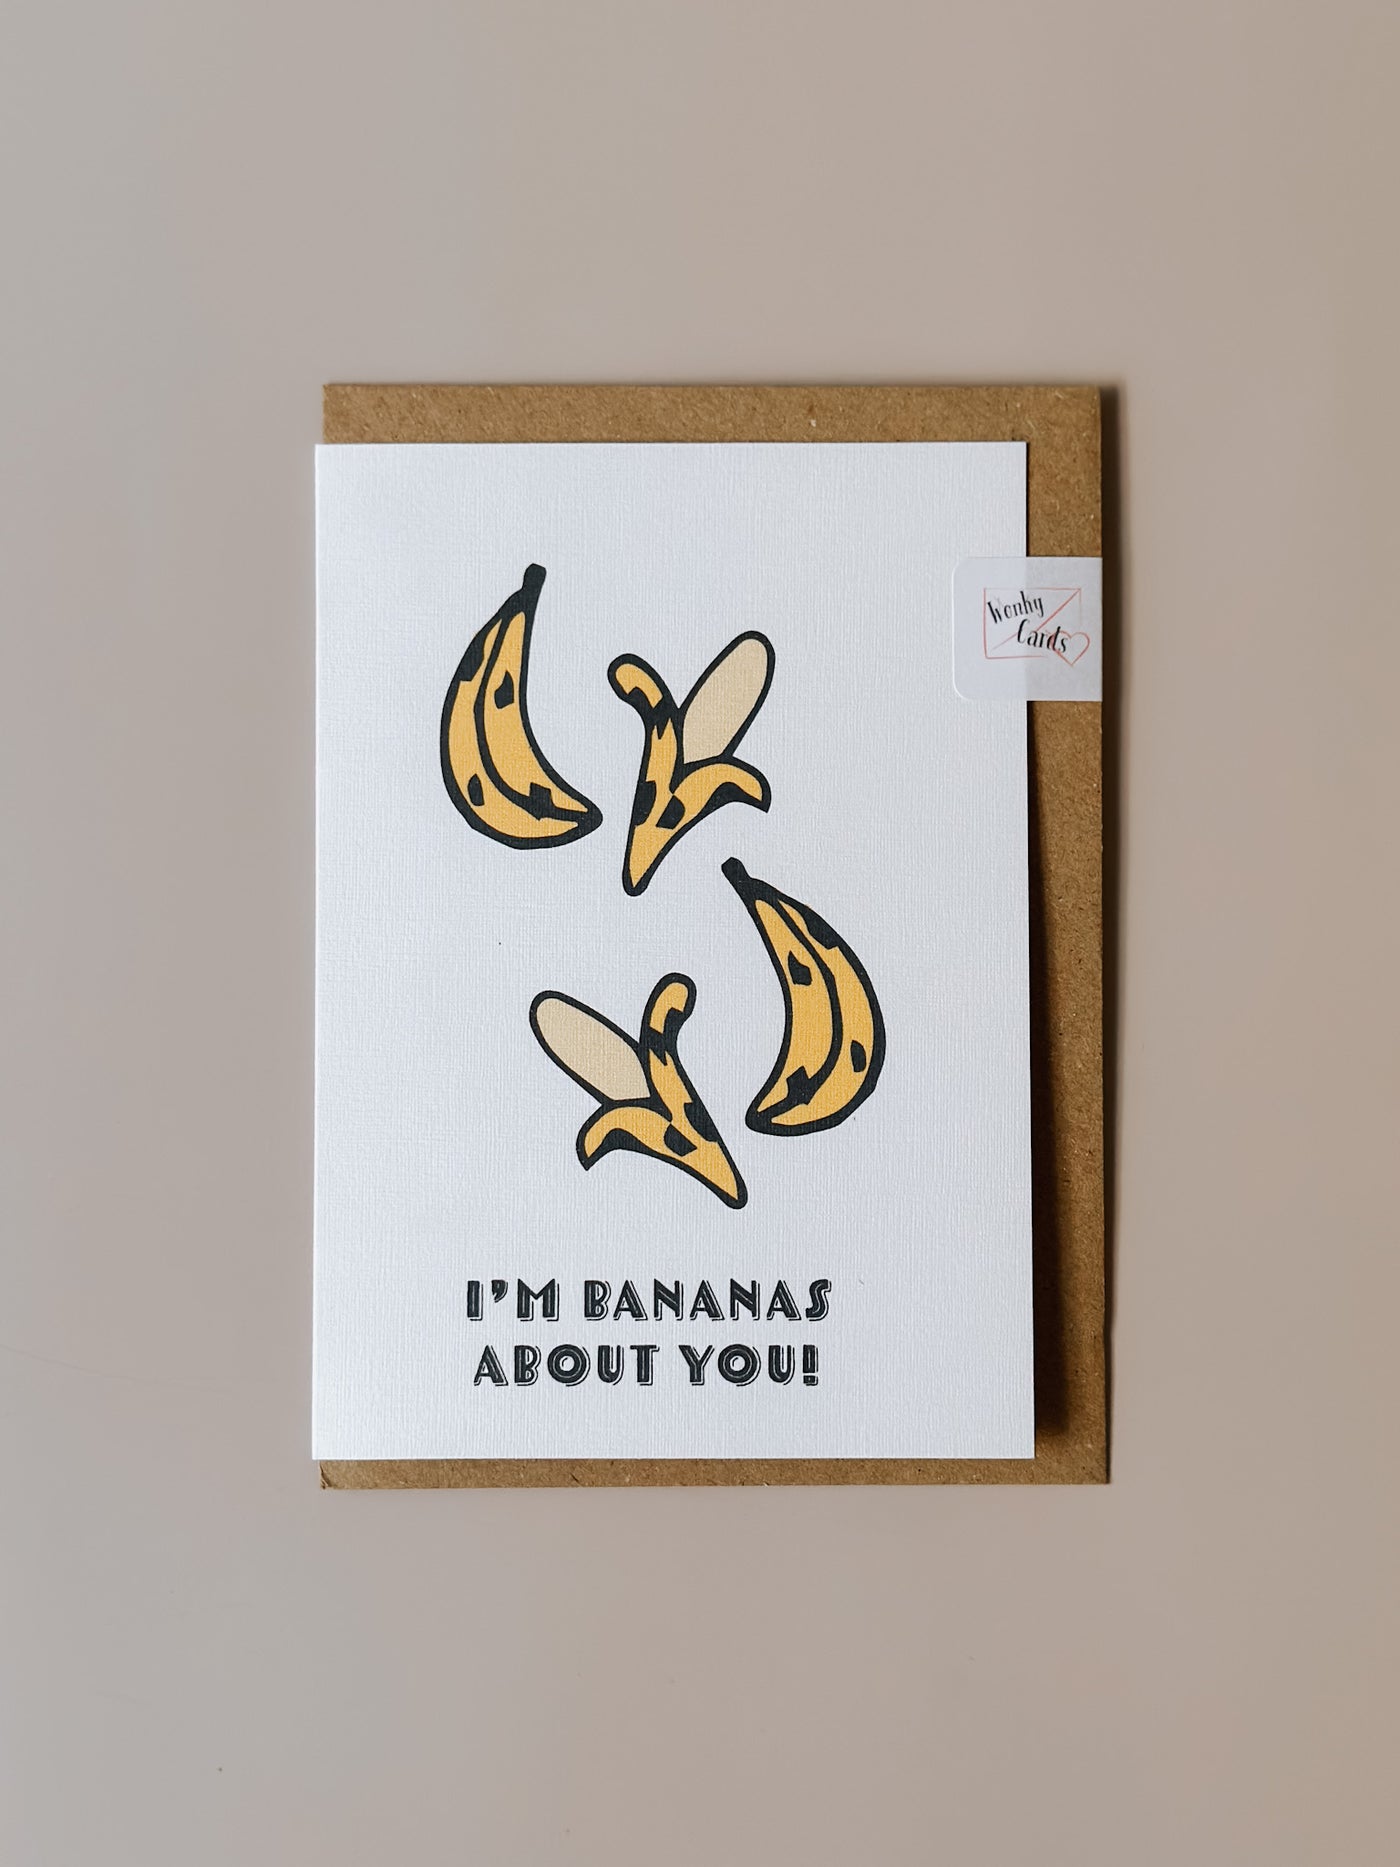 I'm Bananas About You!